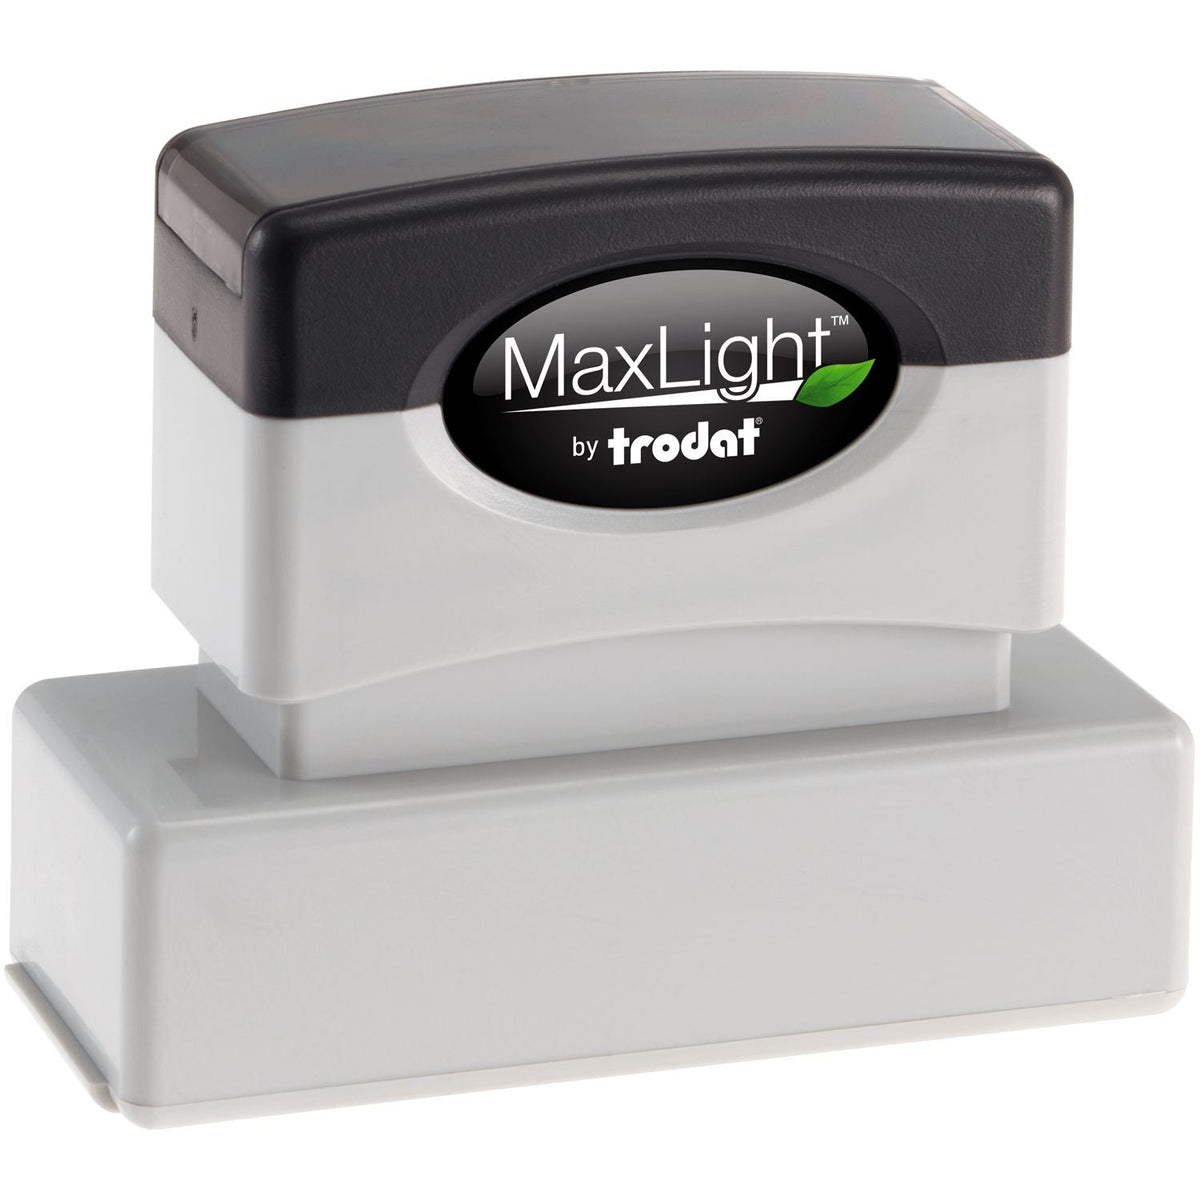 Maxlight Xl2 145 Pre Inked Stamp 5 8 X 2 3 8 Mount Only